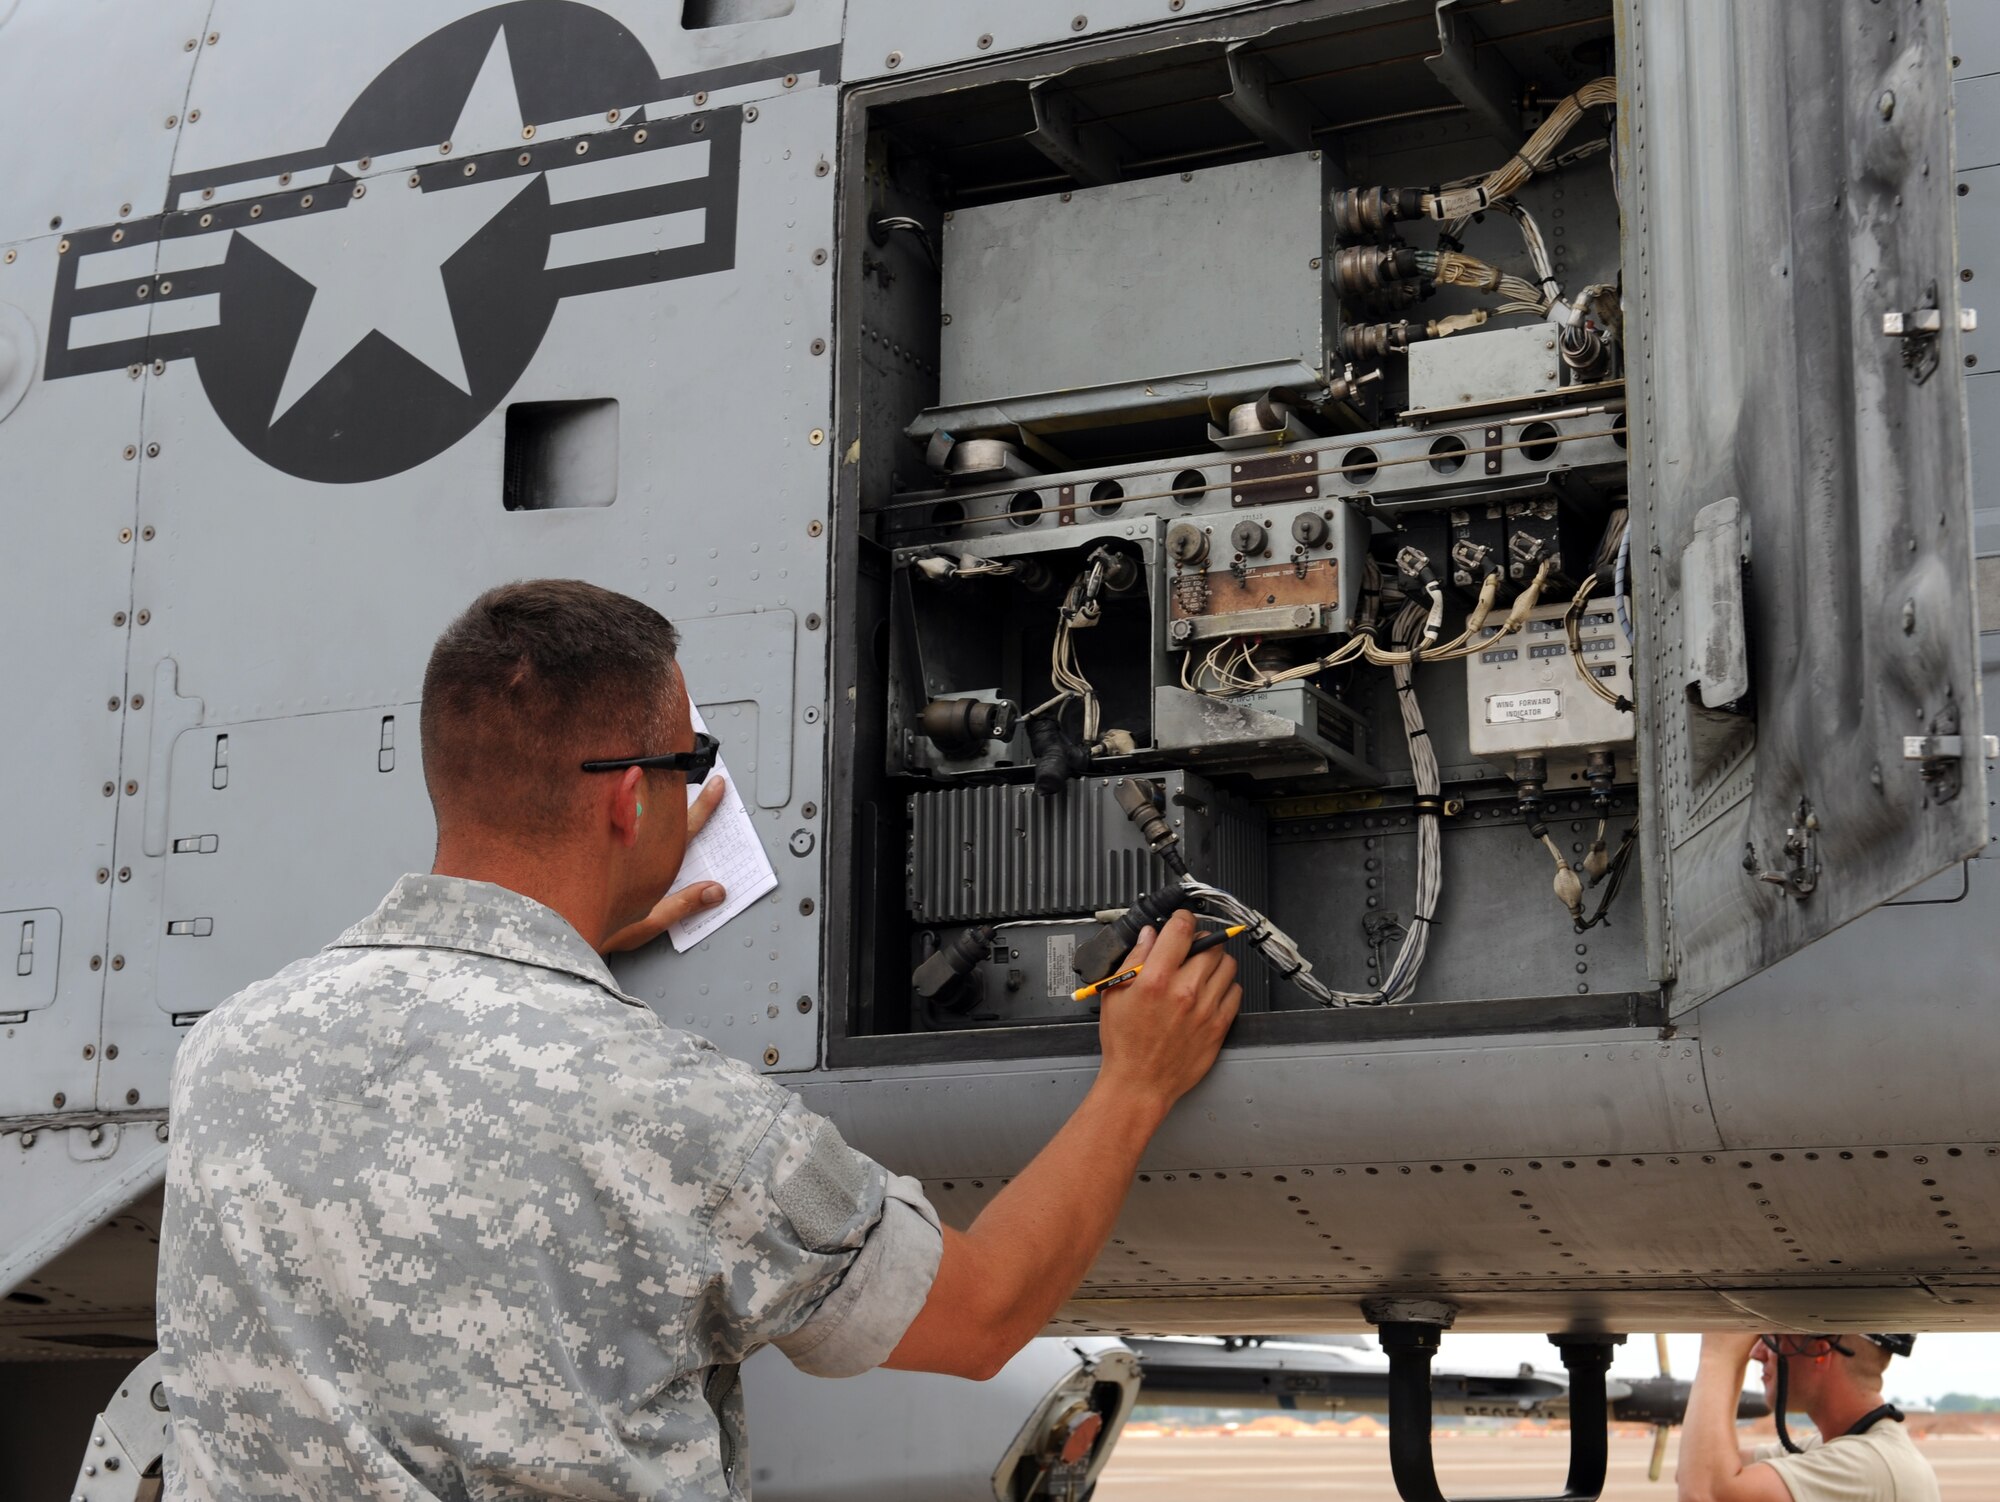 Senior Airman Jason Norris, a crew chief from Moody Air Force Base, Ga., ensures wires inside an A-10 Thunderbolt II fighter are functioning properly after flight on Barksdale Air Force Base, La., June 4, 2013. The Airmen, from Moody, are participating in the exercise Green Flag East. The exercise trains Airmen from different career fields to work together and prepare for deployments to combat environments. (U.S. Air Force photo/Airman 1st Class Benjamin Gonsier)
